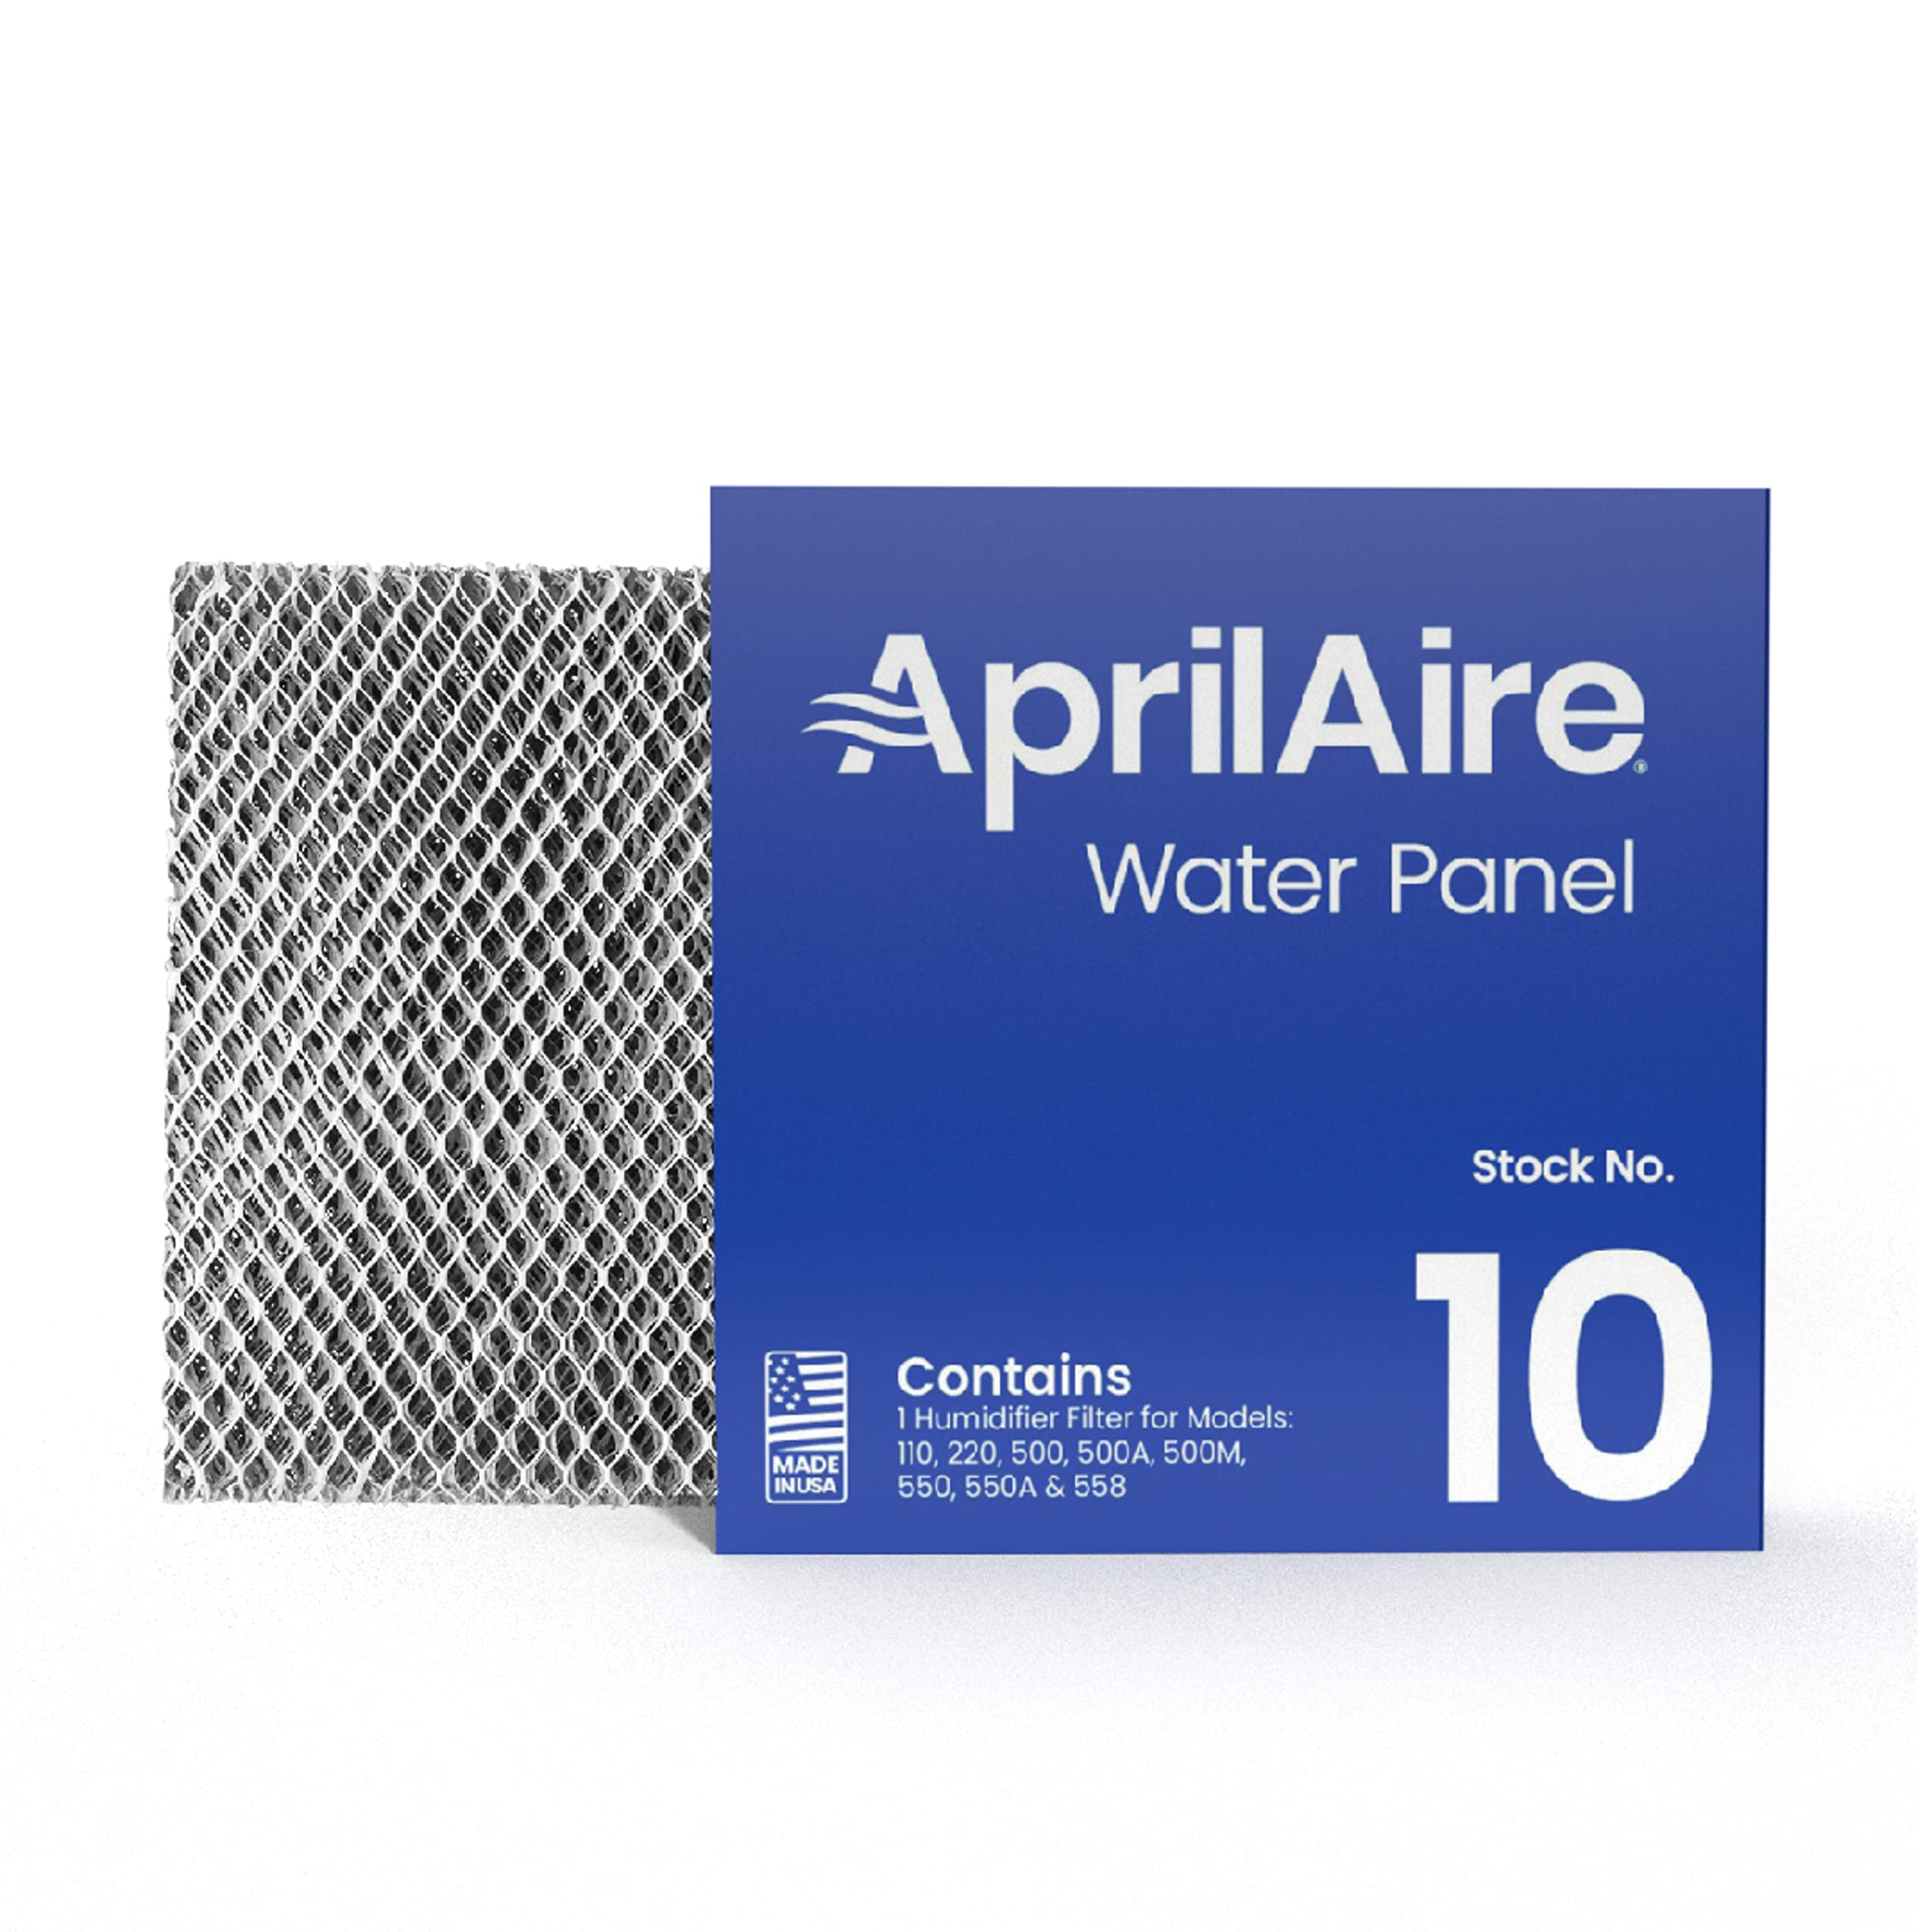 Aprilaire - 10 A1 10 Replacement Water Panel for Whole House Humidifier Models 110, 220, 500, 500A, 500M, 550, 558